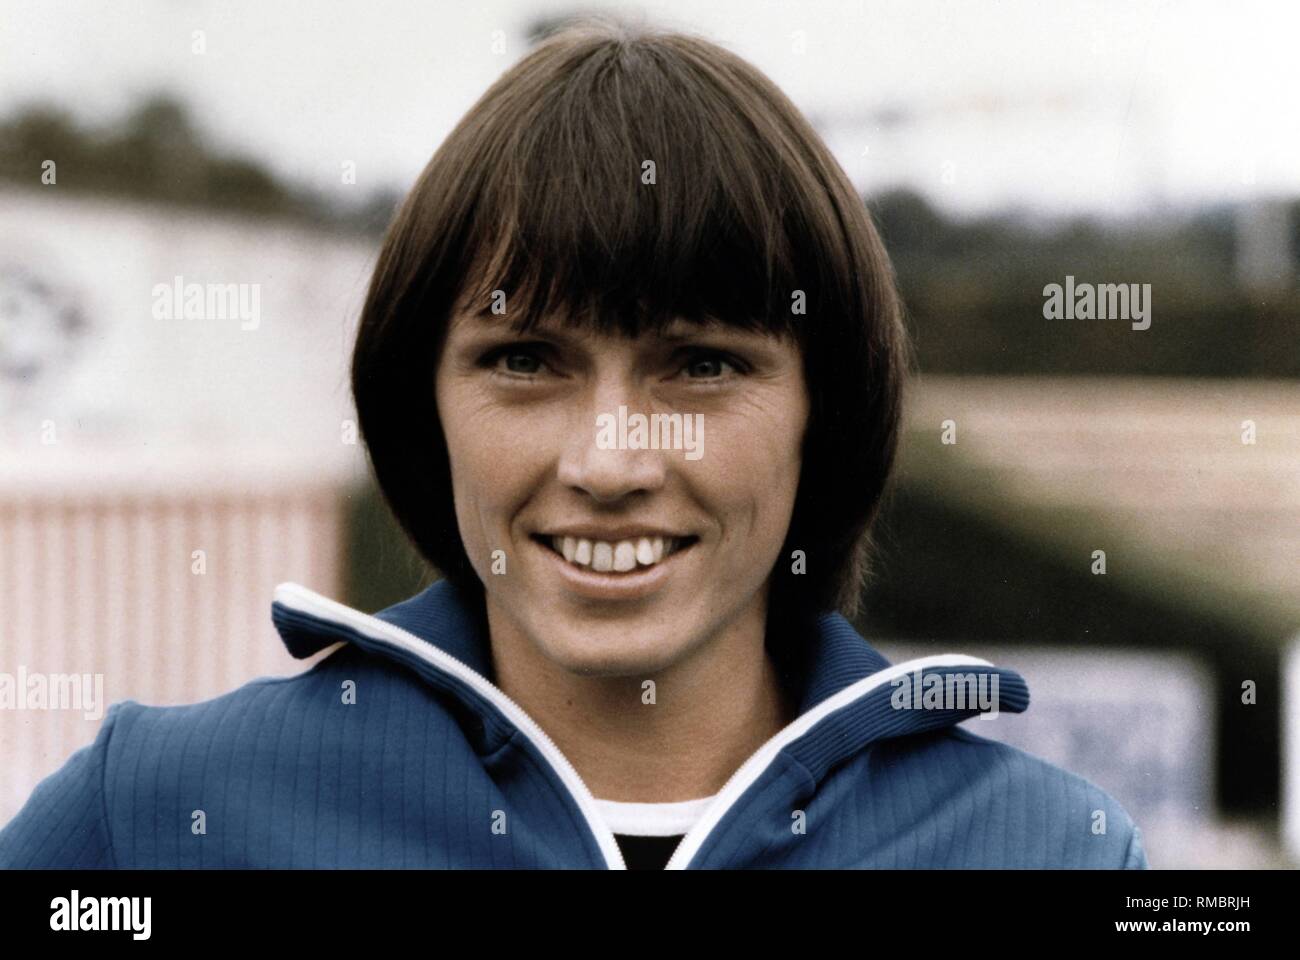 Baerbel Woeckel, born Eckert in 21.03.1955. A track and field athlete of the GDR, Olympic champion at the Olympics 1976 in Montreal and 1980 in Moscow in women's 200-meter sprint. Photo from August 1982 at a sports festival in Frankfurt am Main. Stock Photo